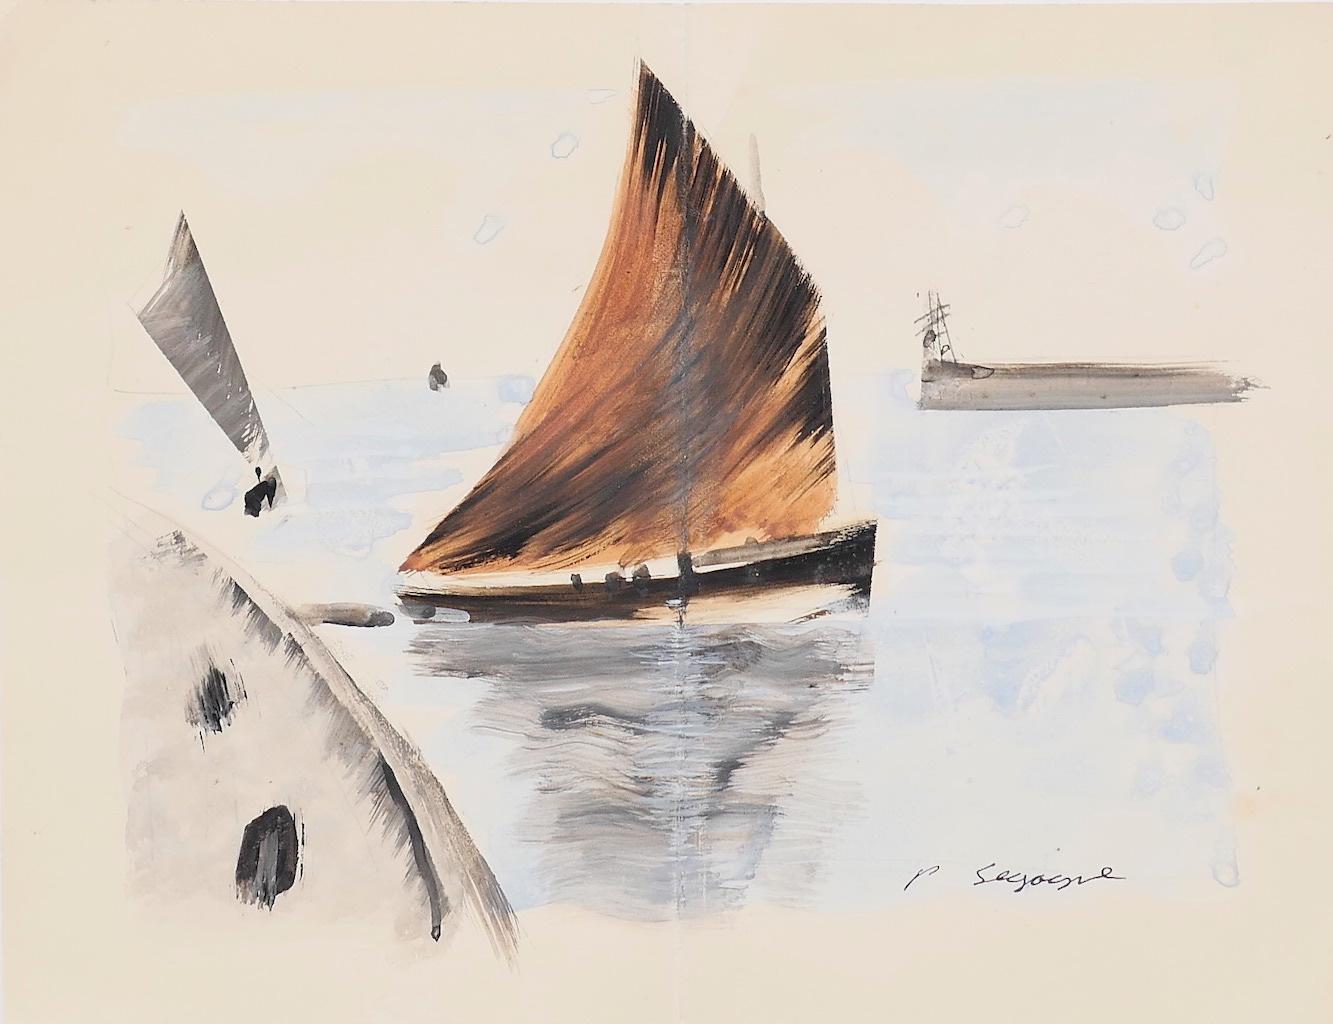 Pierre Segogne Figurative Art - Boat - Original Ink and Watercolor Drawing - 20th Century